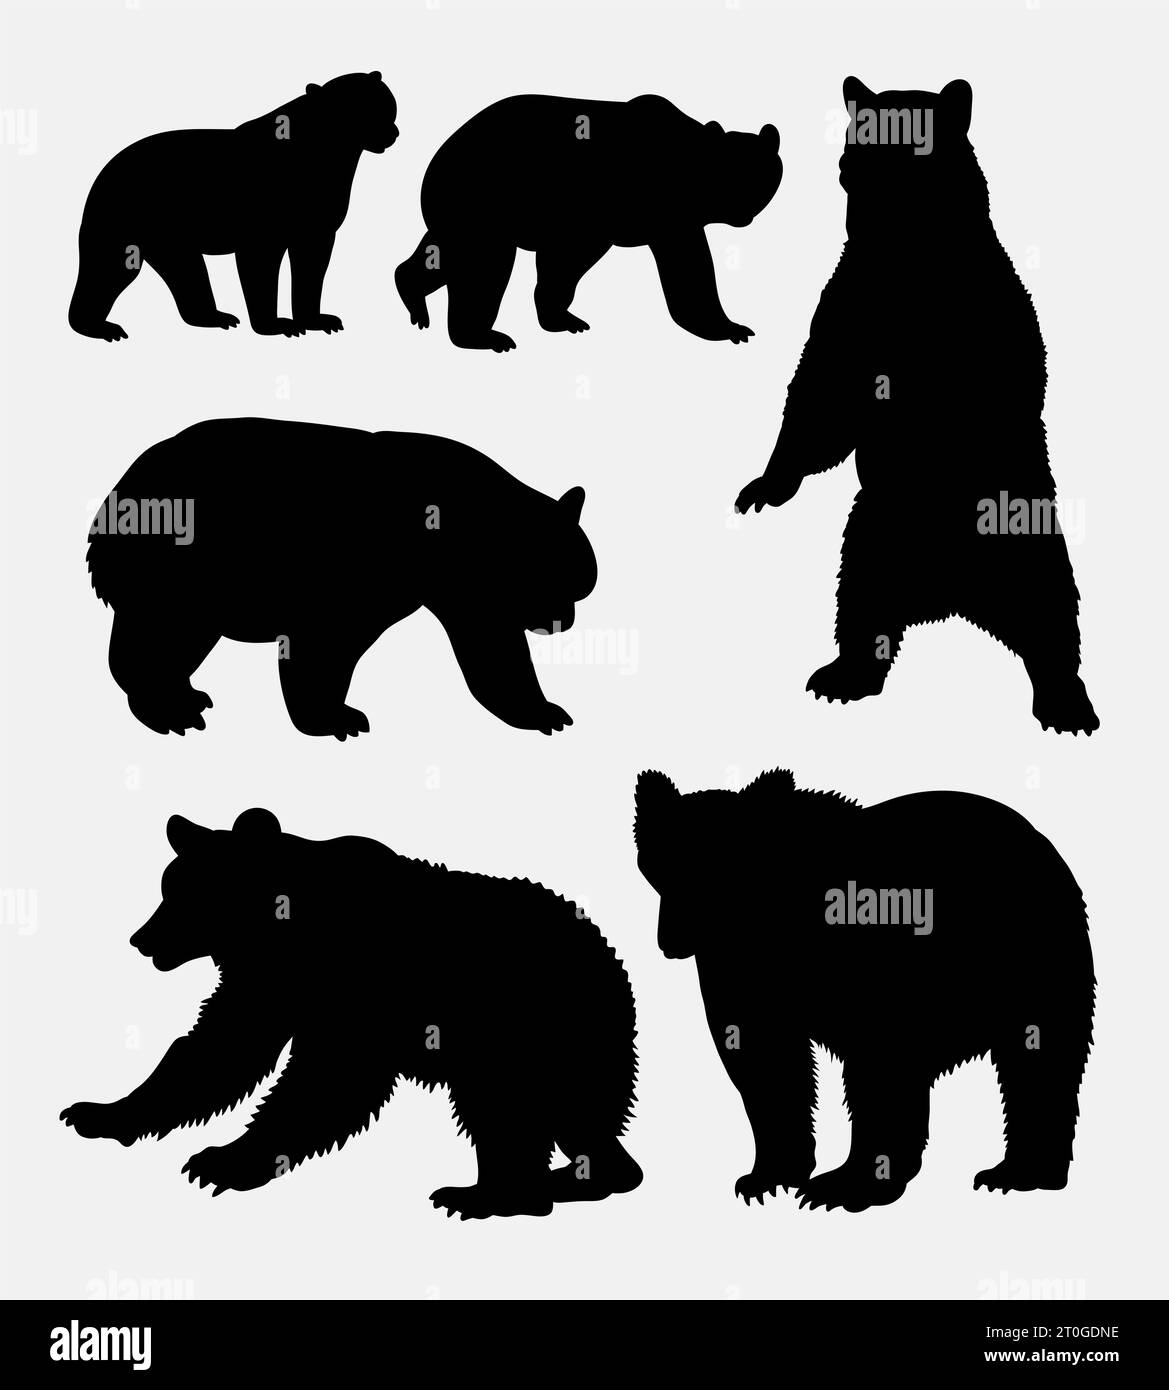 grizzly bear pose silhouette Stock Vector